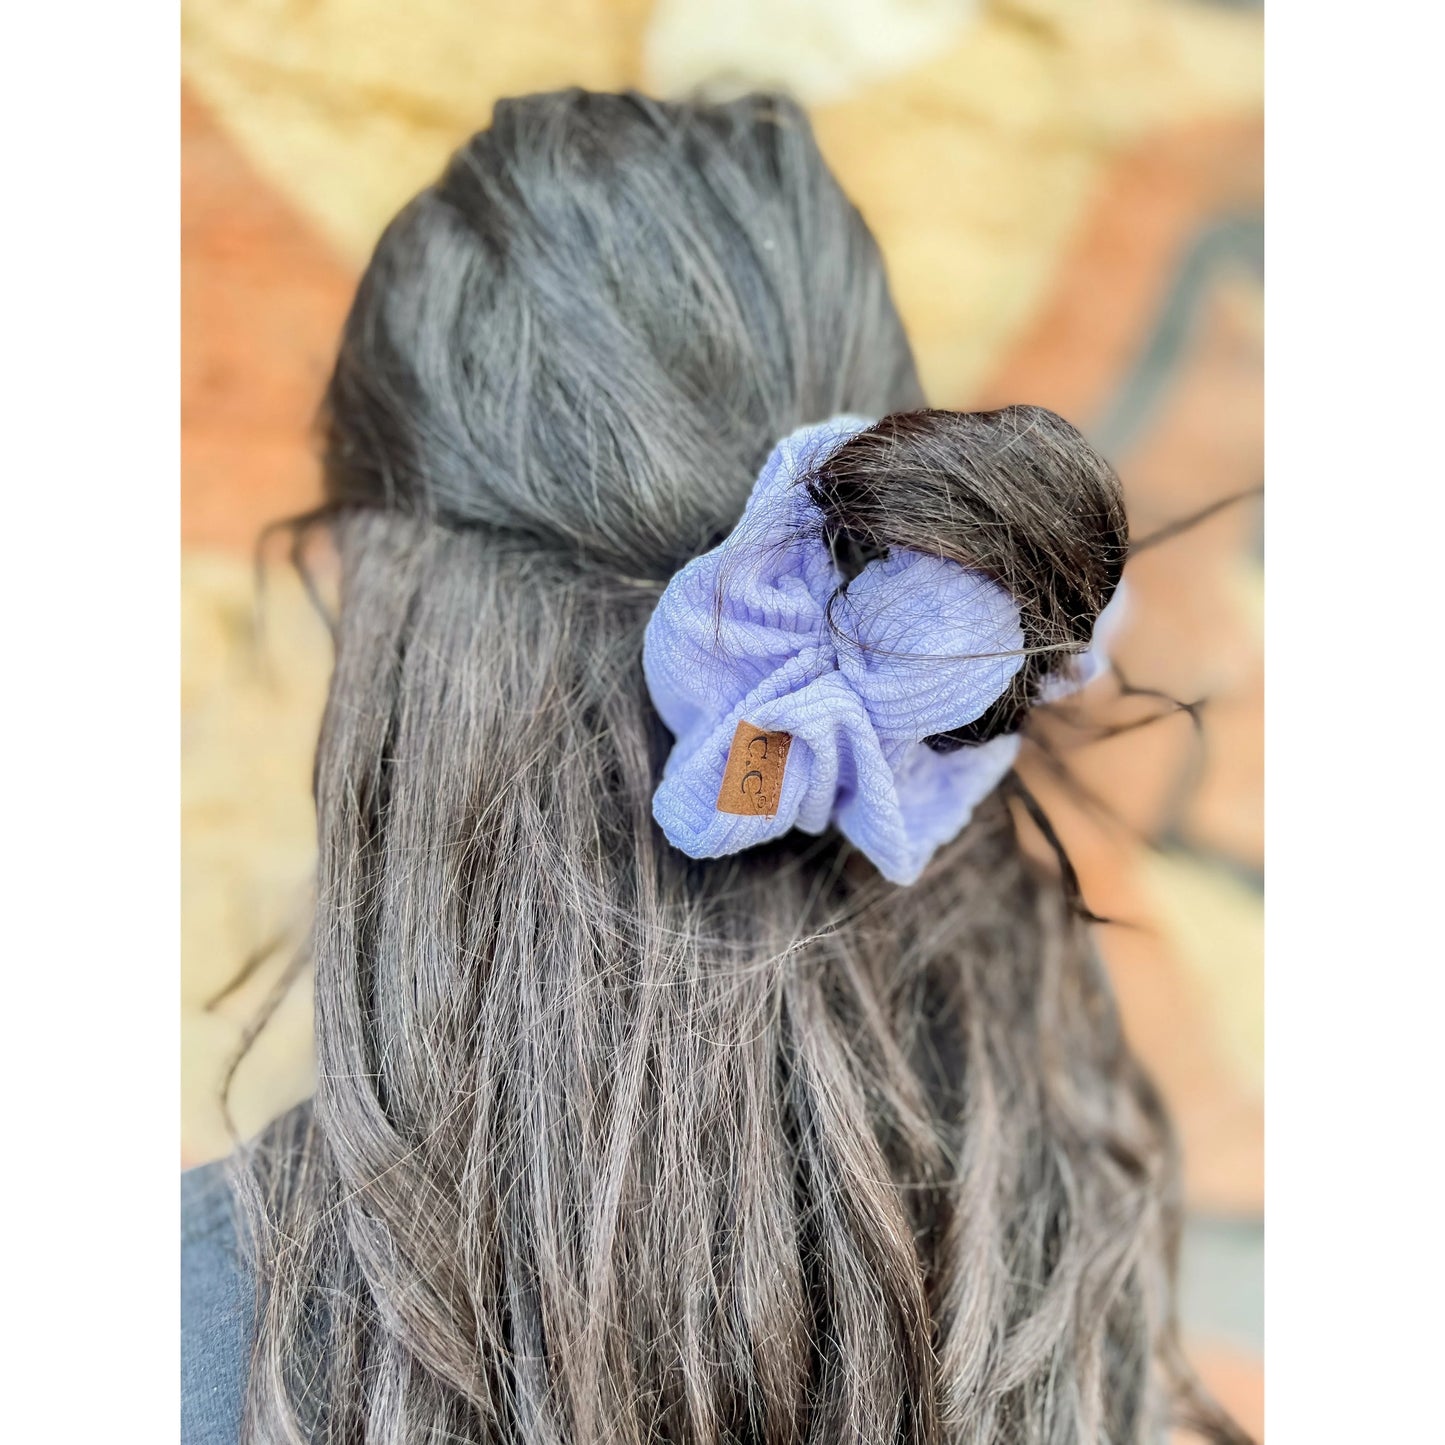 Corduroy C.C Scrunchie - Click to see MORE